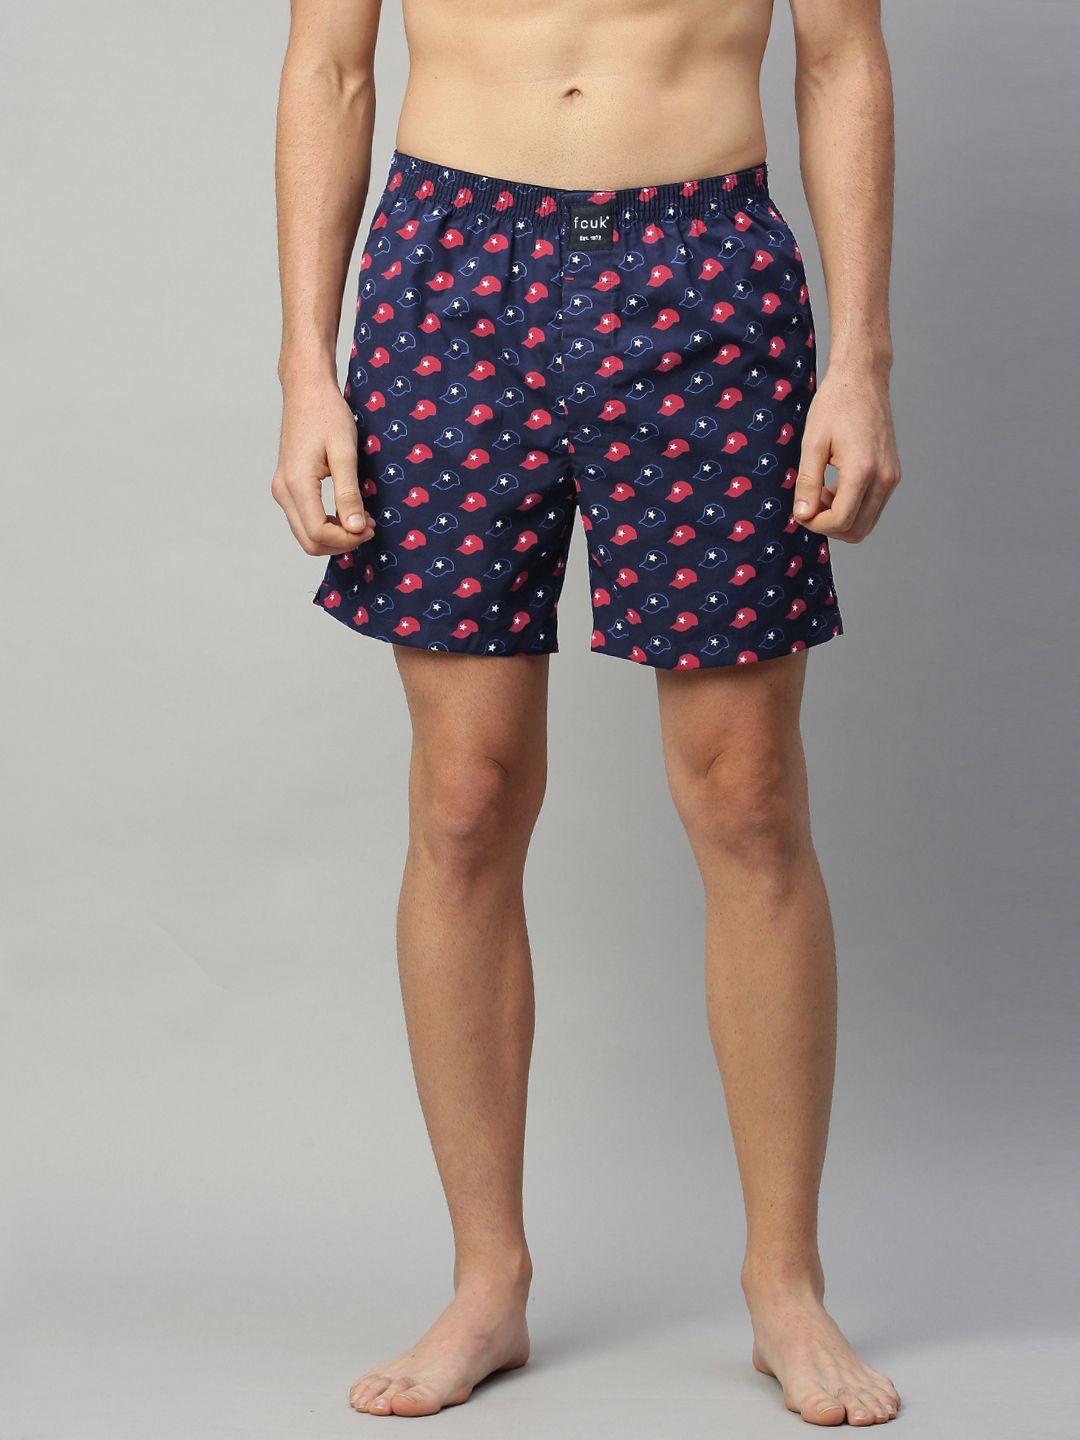 fcuk men's navy blue and red printed pure cotton boxers